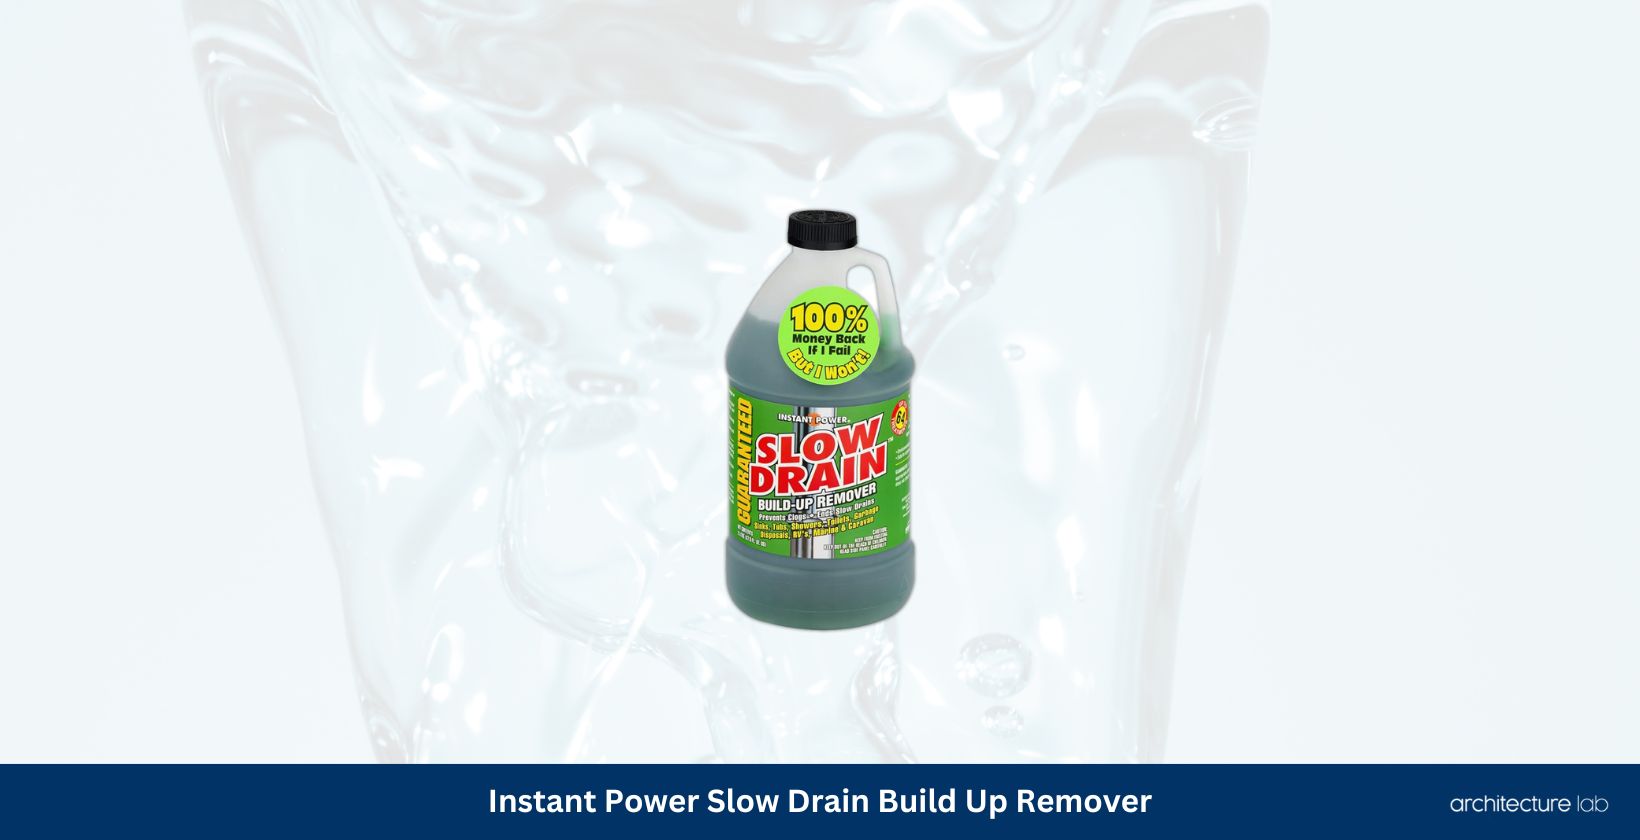 Instant power 1907 slow drain build up remover